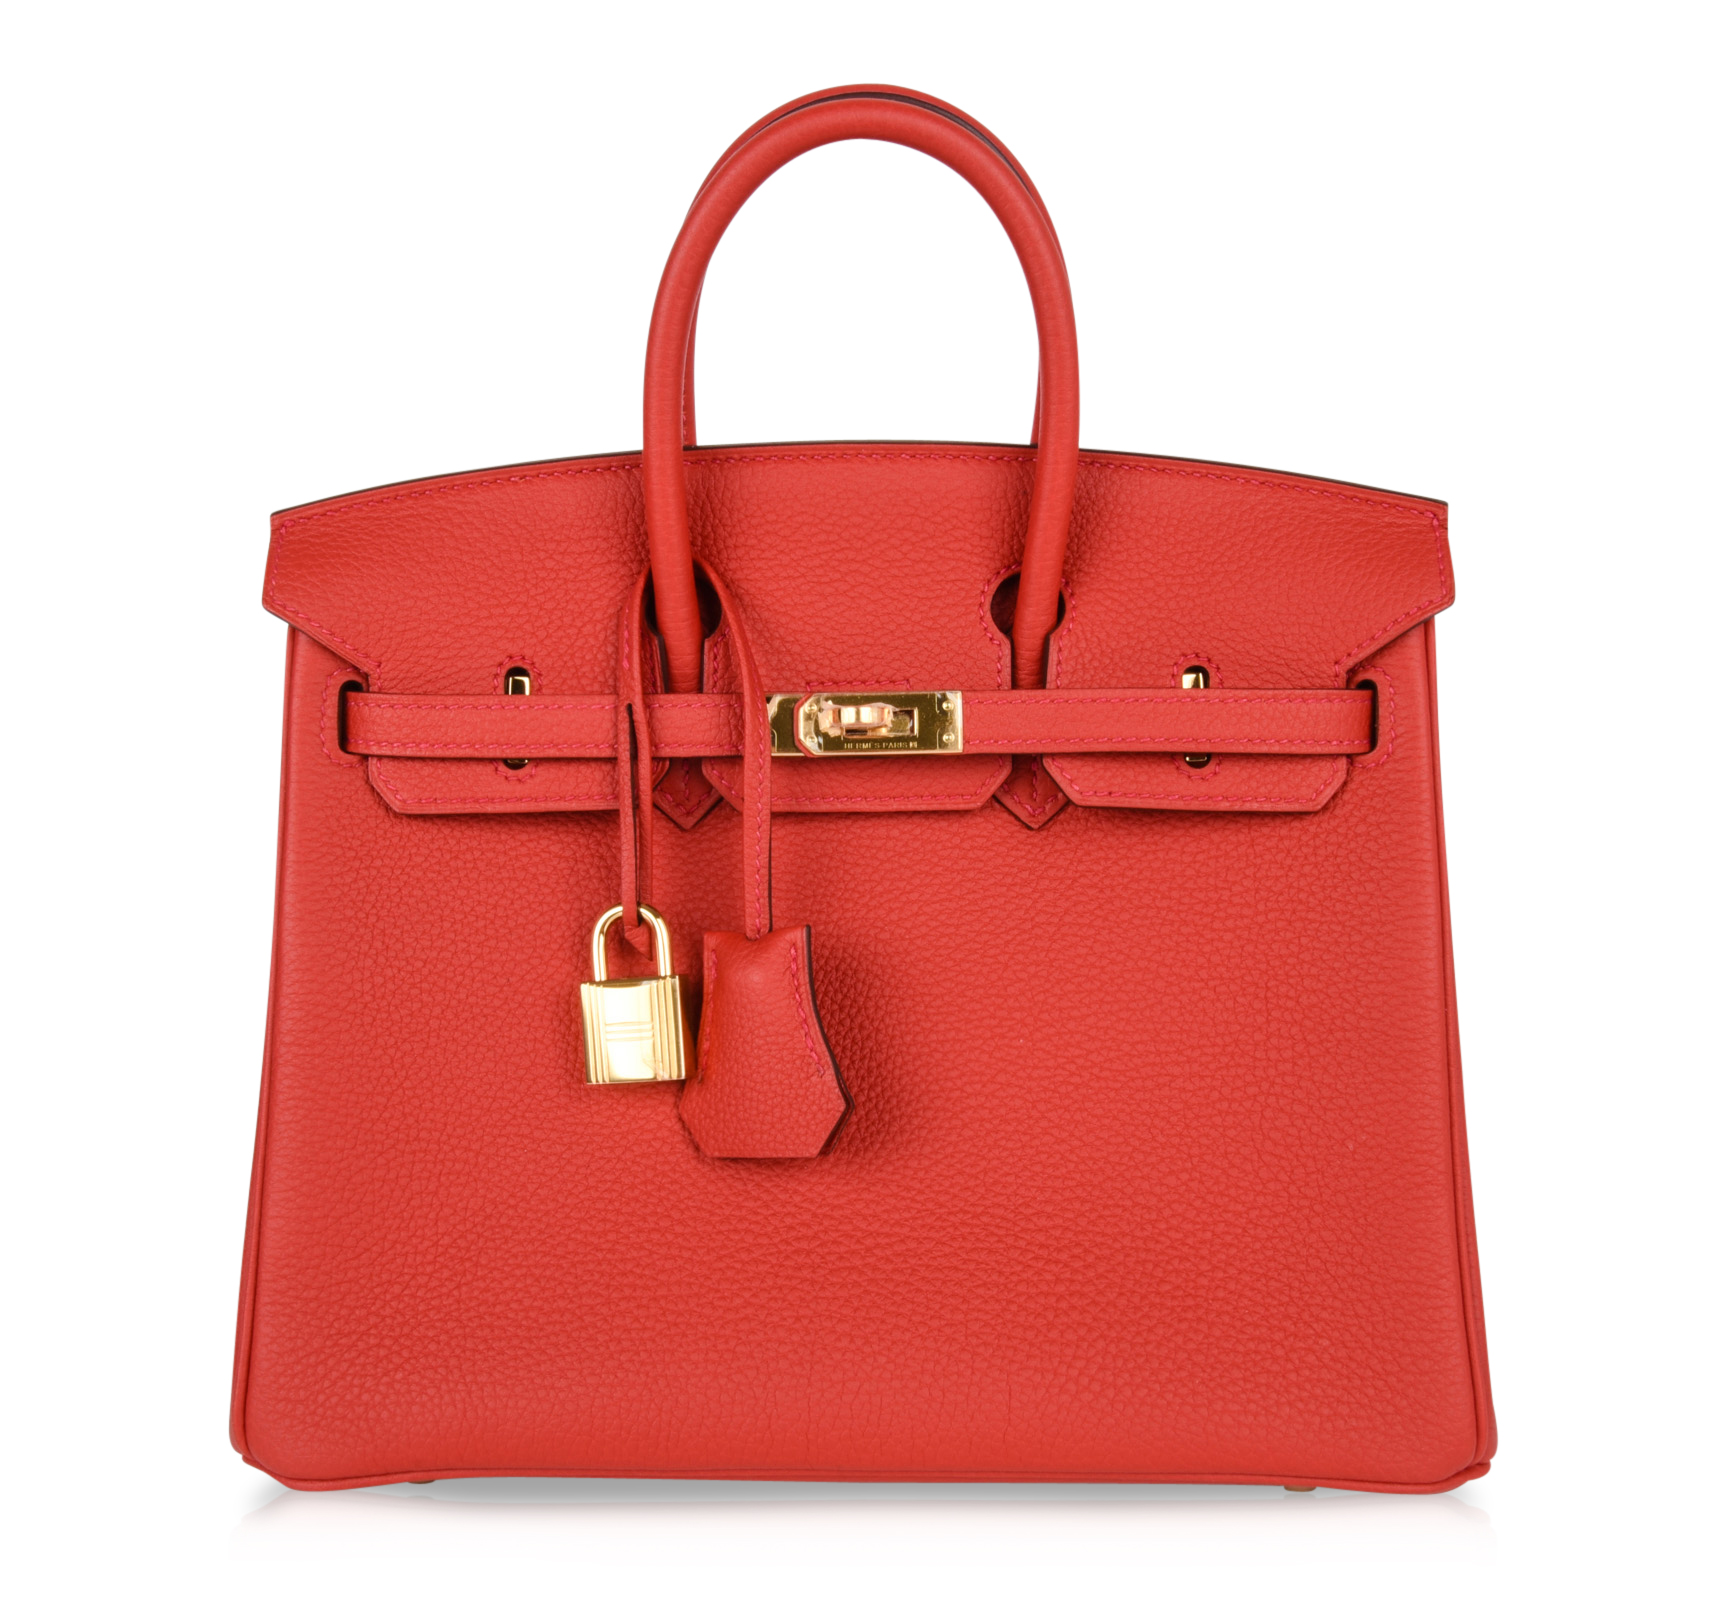 Hermes Bag Outlet In Indiana | IQS Executive